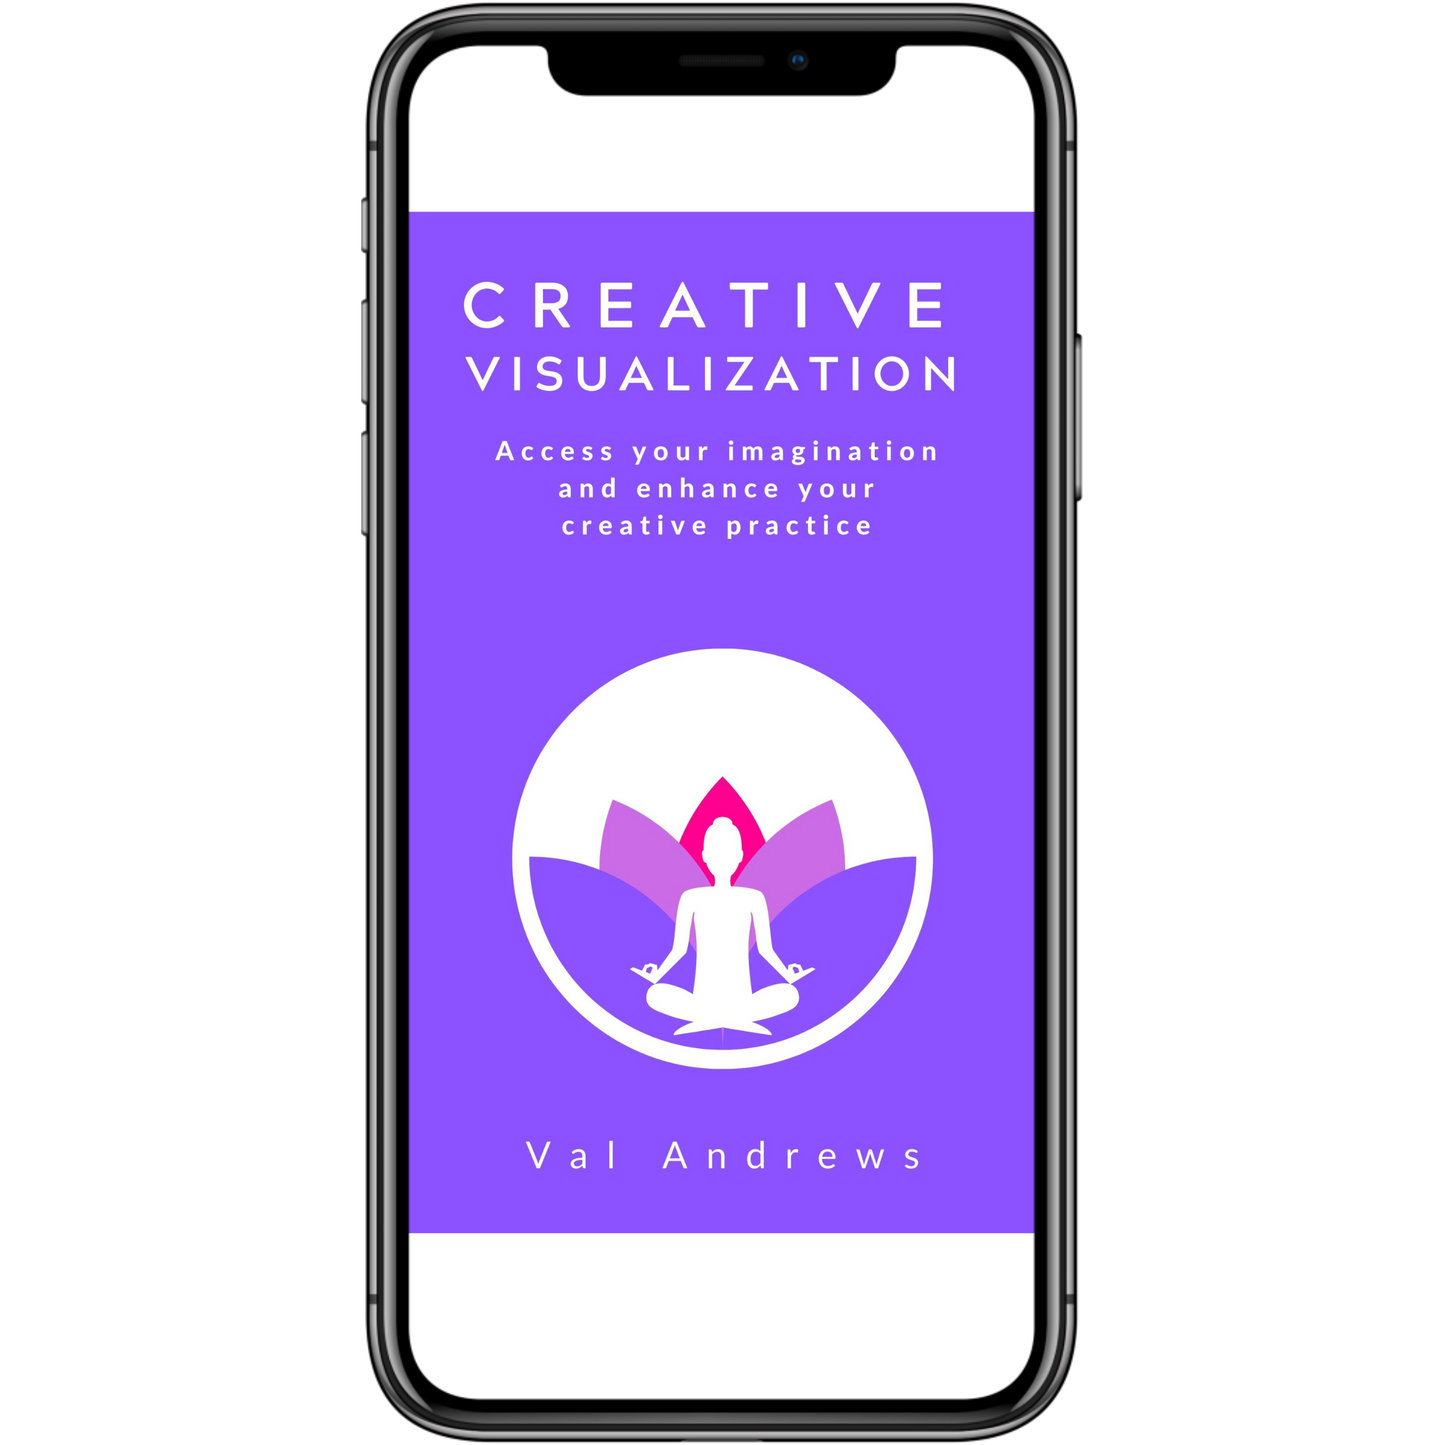 Creative Visualization: Access your imagination and enhance your creative practice